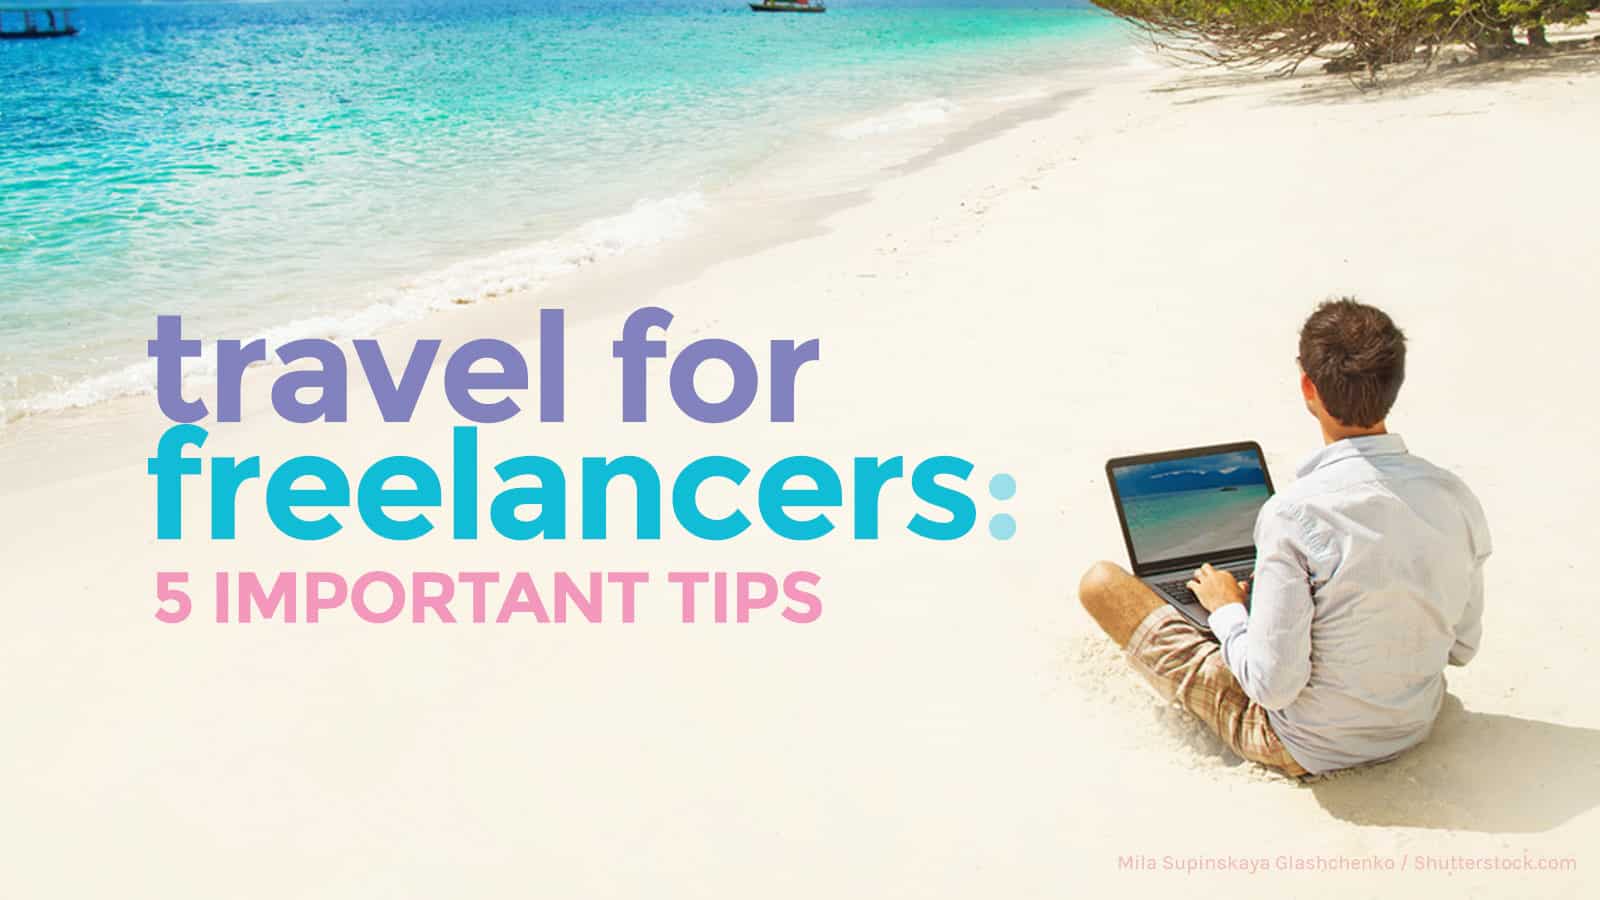 TRAVEL FOR FREELANCERS: 5 Important Tips